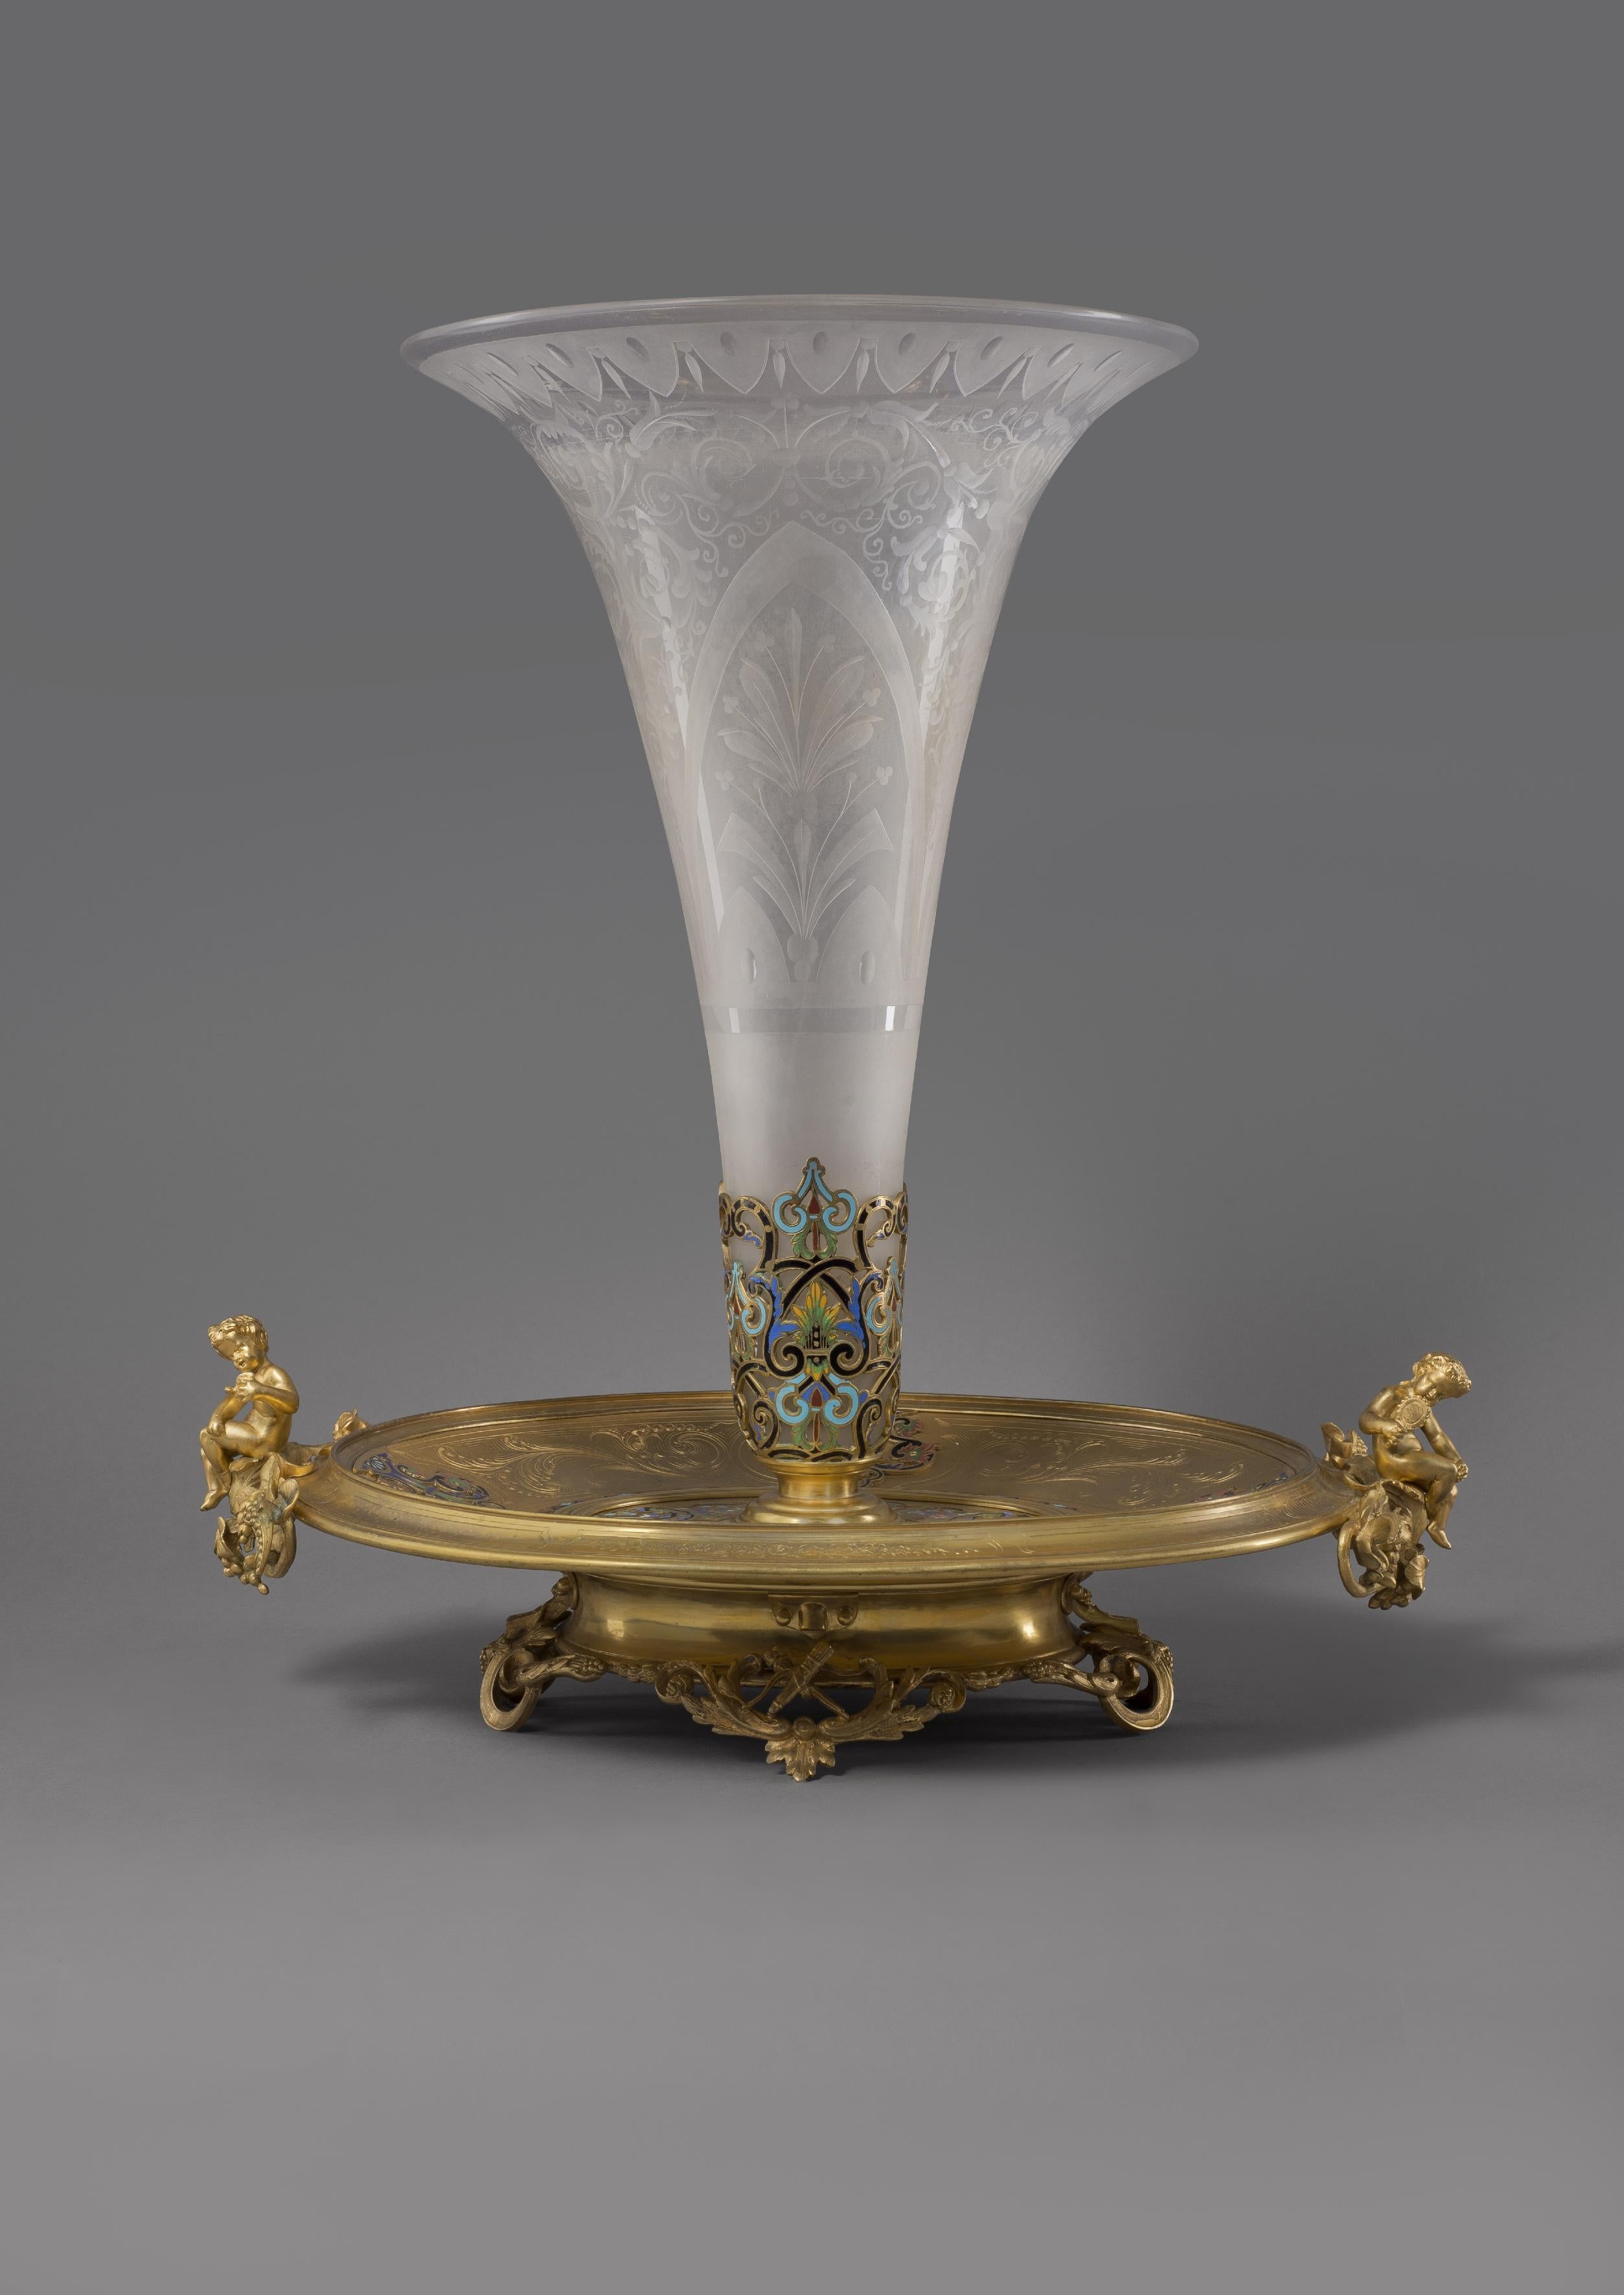 A Napoléon III gilt bronze and Champlevé enamel centrepiece, in the manner of Maison Alphonse Giroux.

French, circa 1870. 

This exquisite centrepiece has a frosted glass trumpet vase engraved with anthemion and supported by a neo-classical